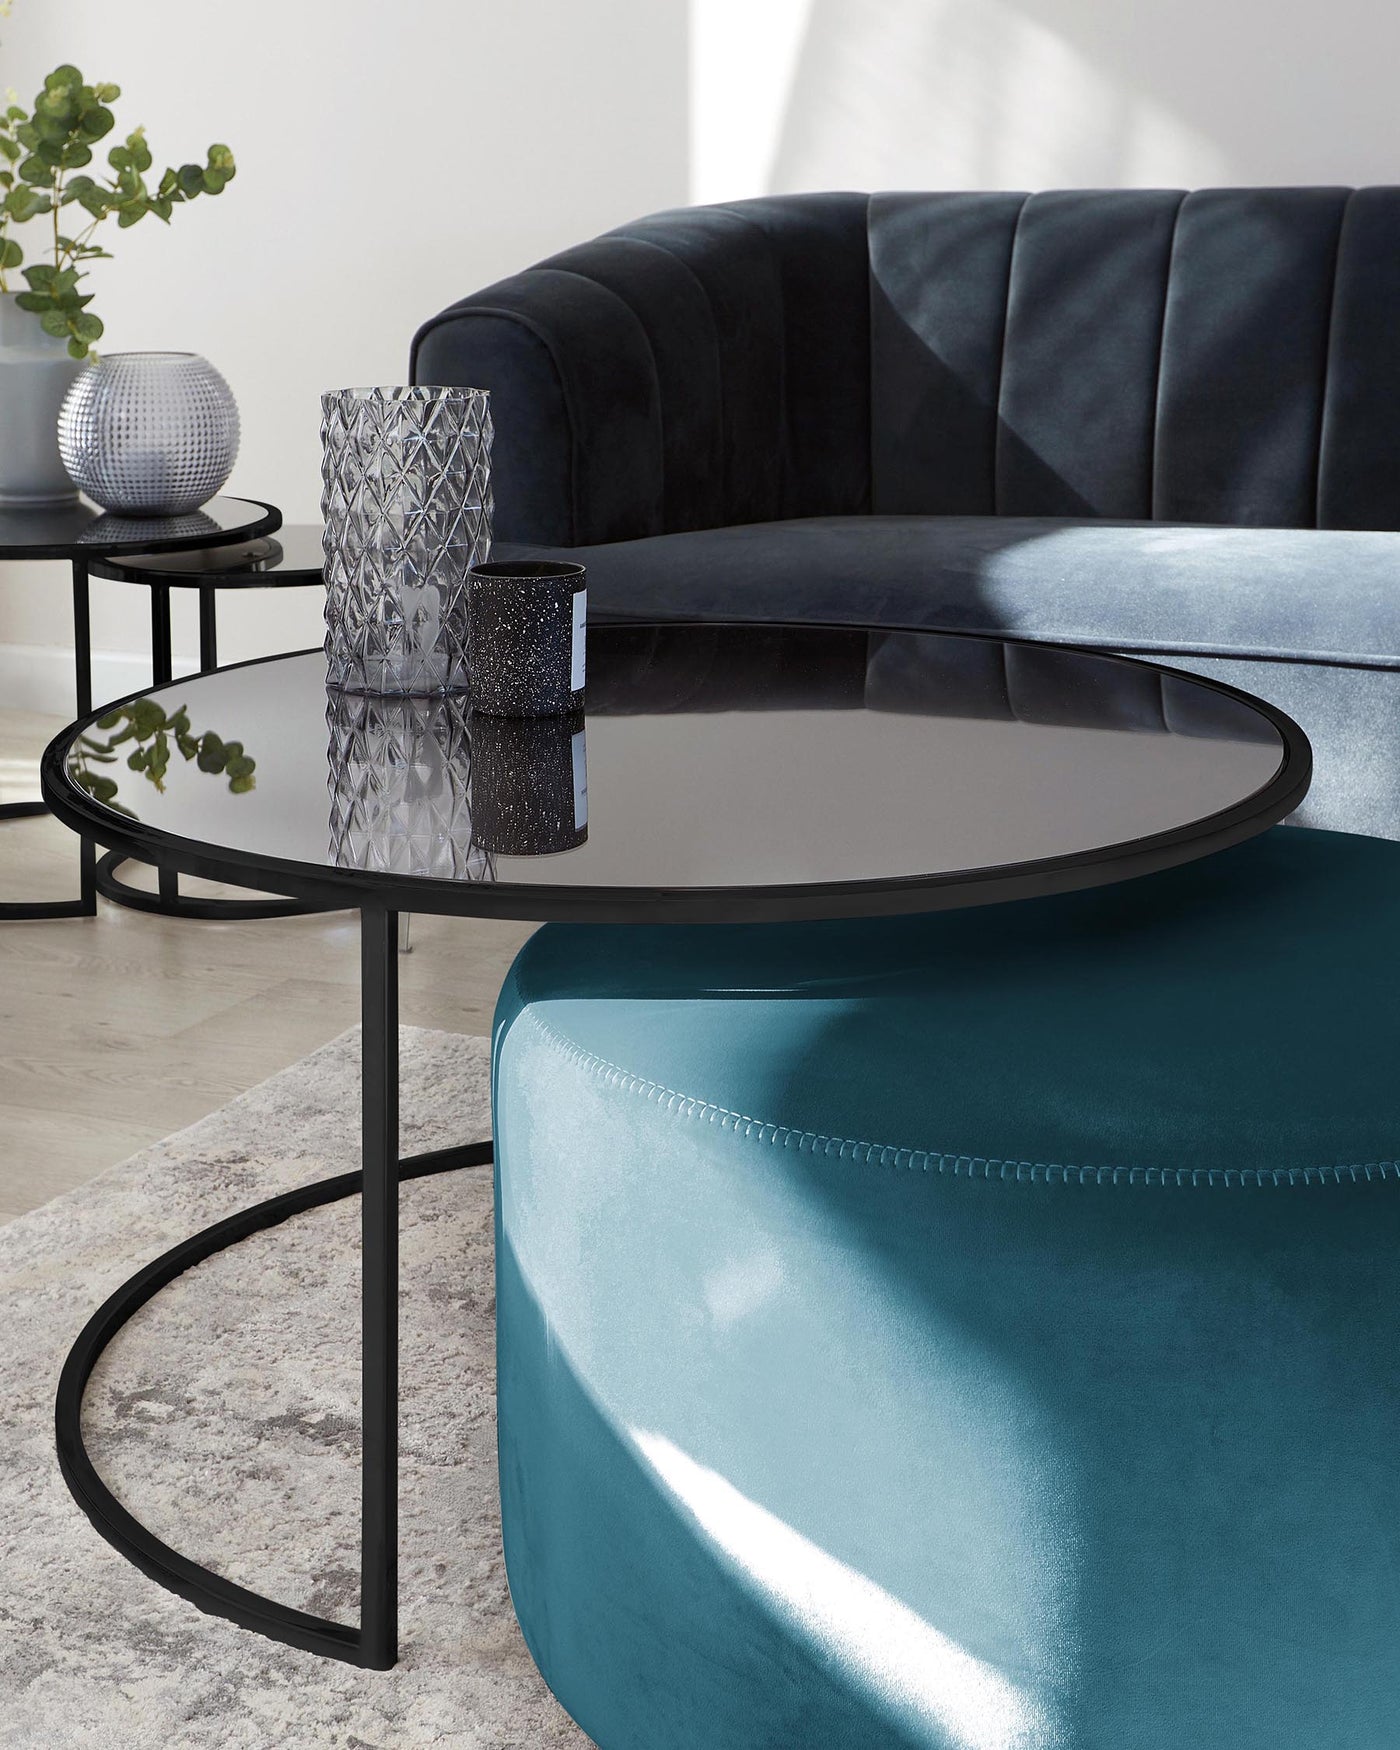 Thea Round Black Coffee Table and Dark Teal Pouffe Set